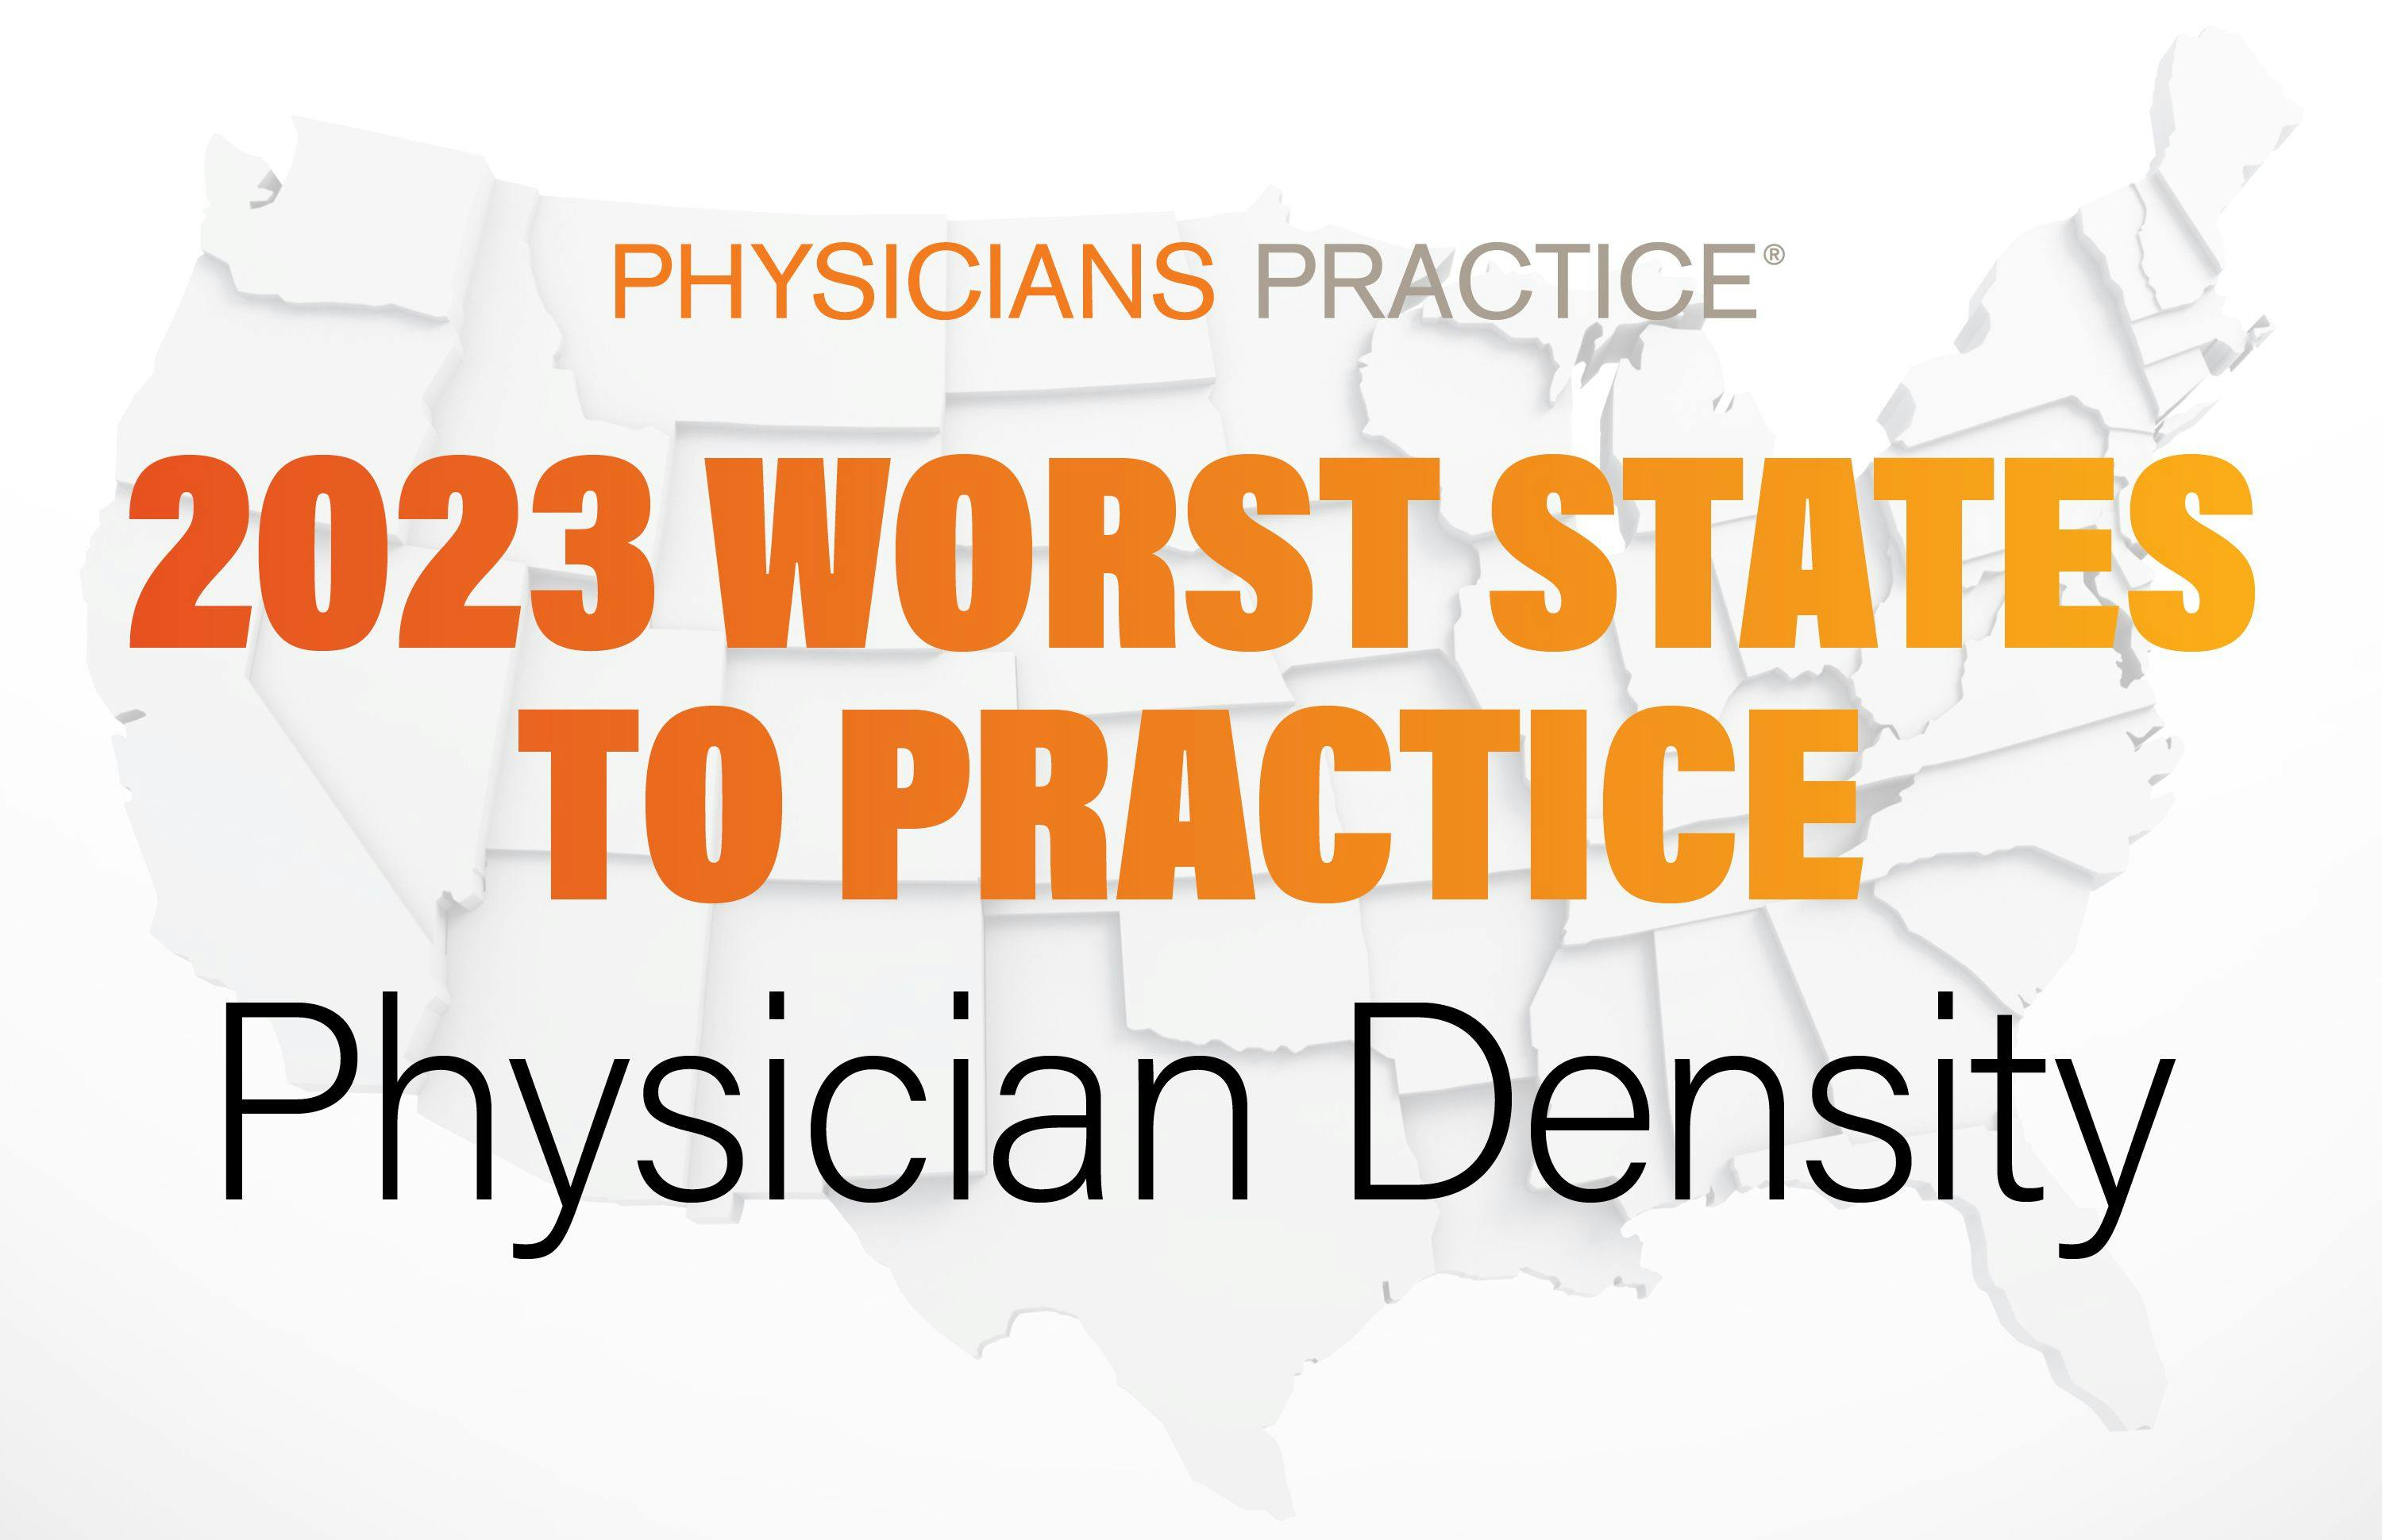 9 Worst states to practice for physician density